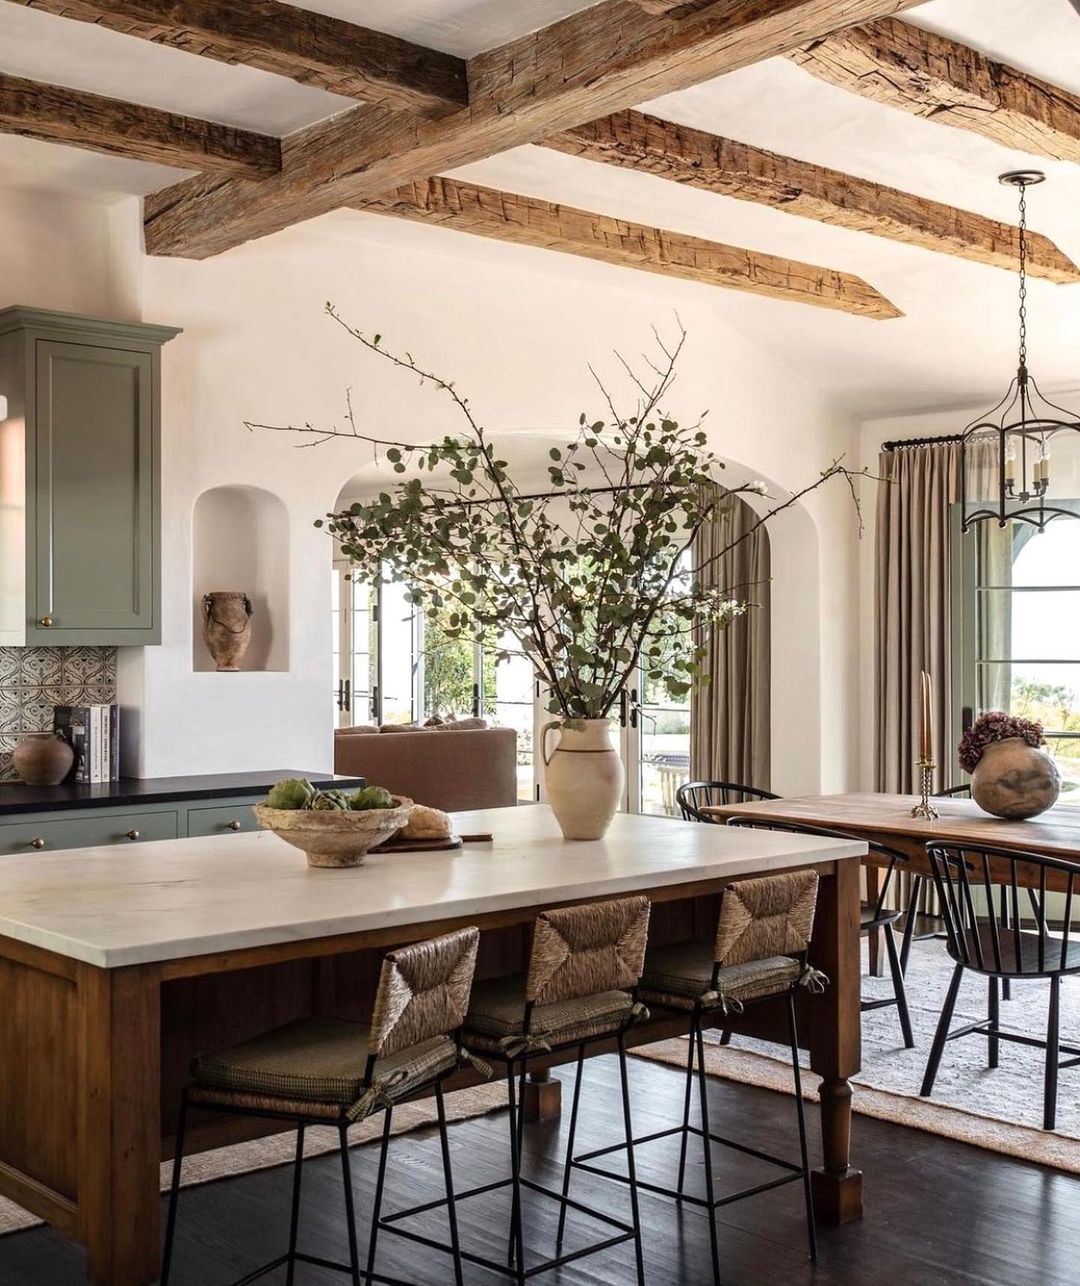 Farmhouse Chic with Crossed Red Wood Beams